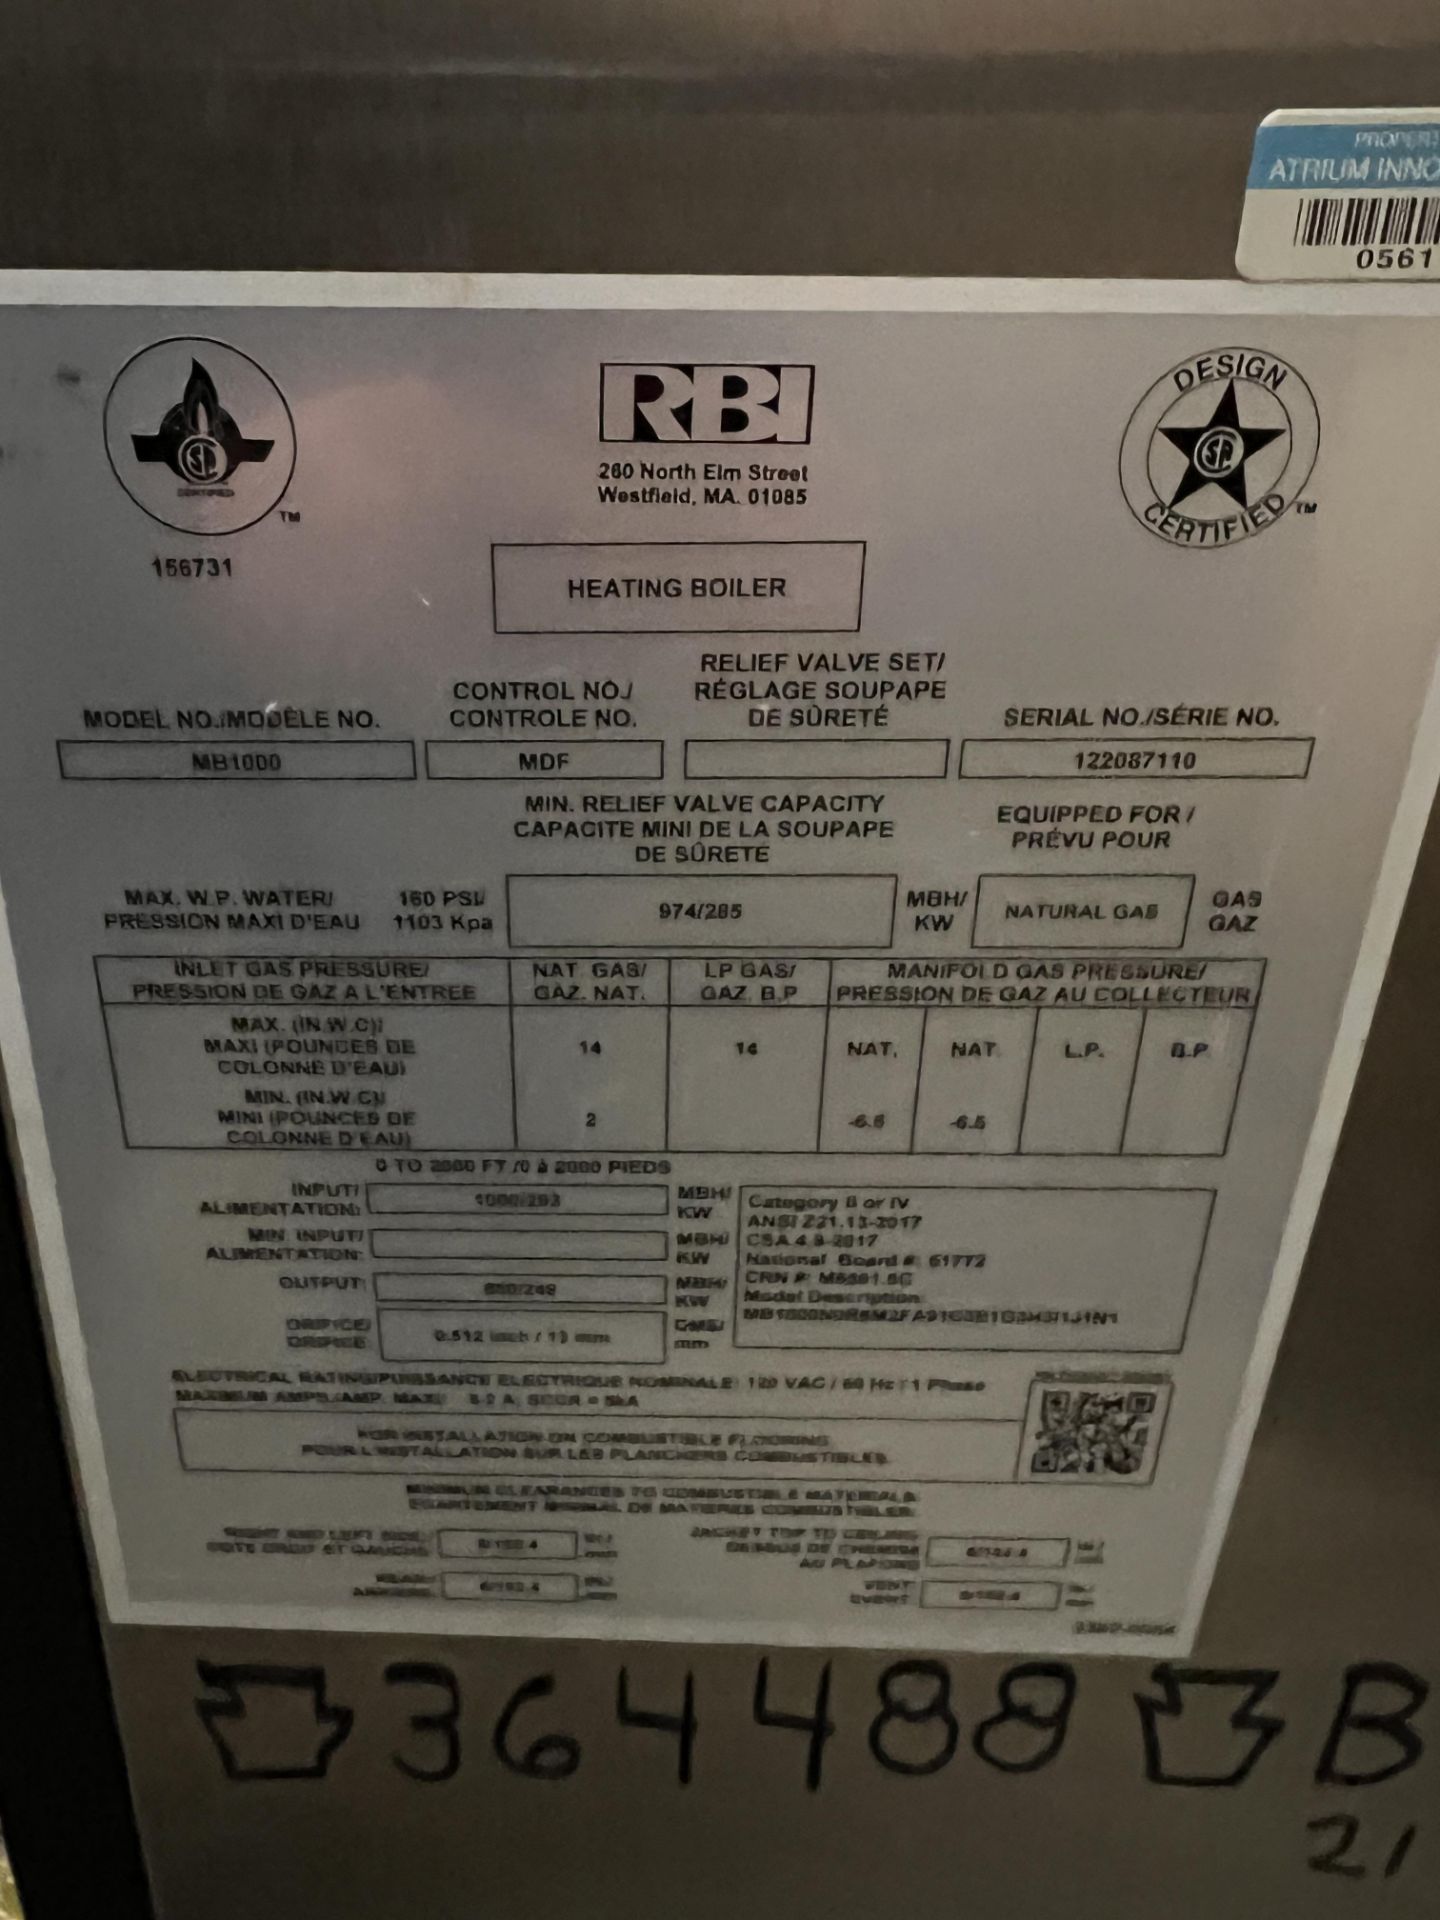 RBI FUTERA 3 NATURAL GAS BOILER, MODEL MB1000, S/N 122087110, 160 PSI, PREVIOUSLY OPERATING IN - Image 7 of 9